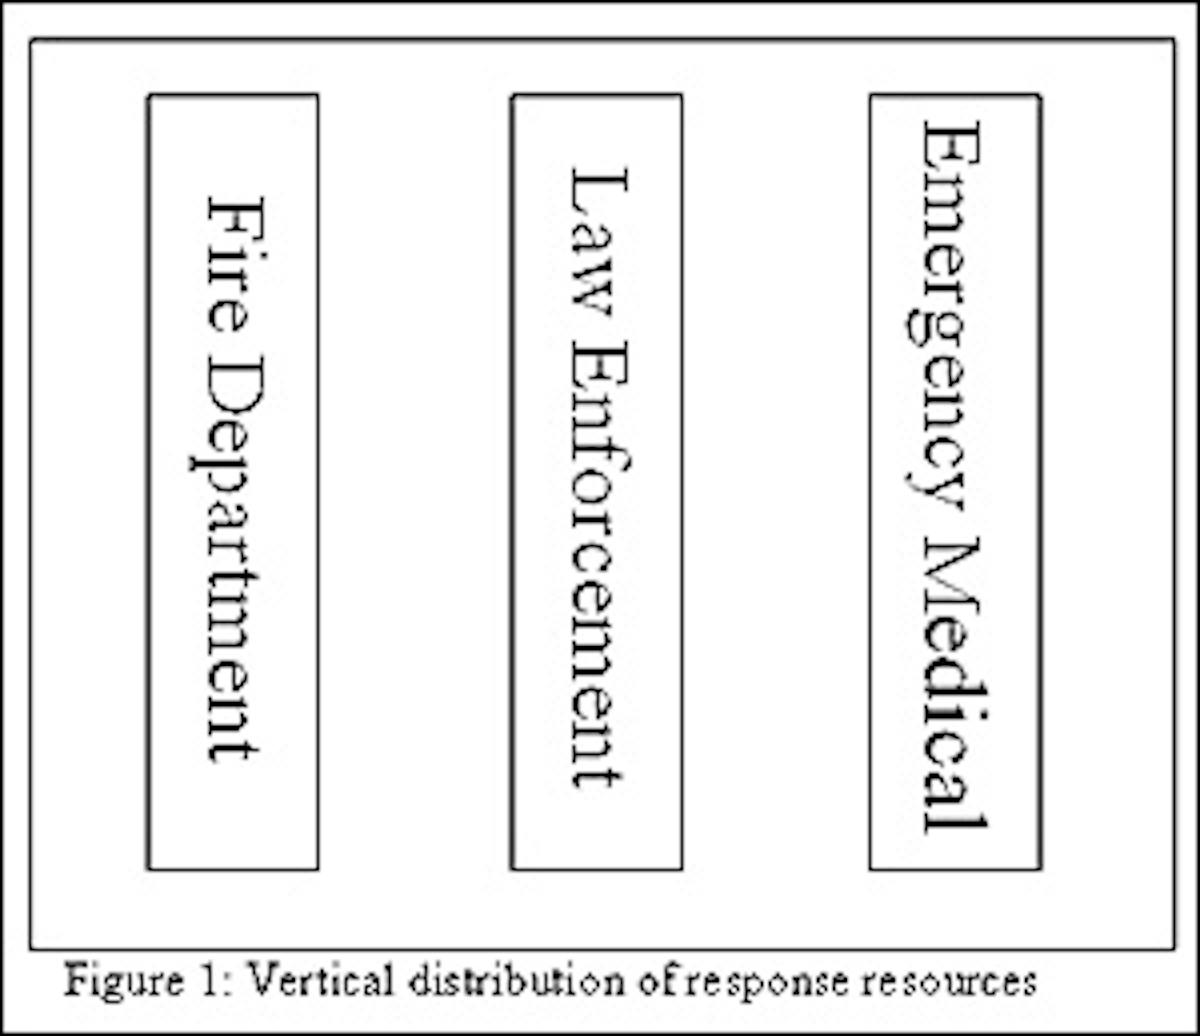 Figure 1. Vertical distribution of response resources